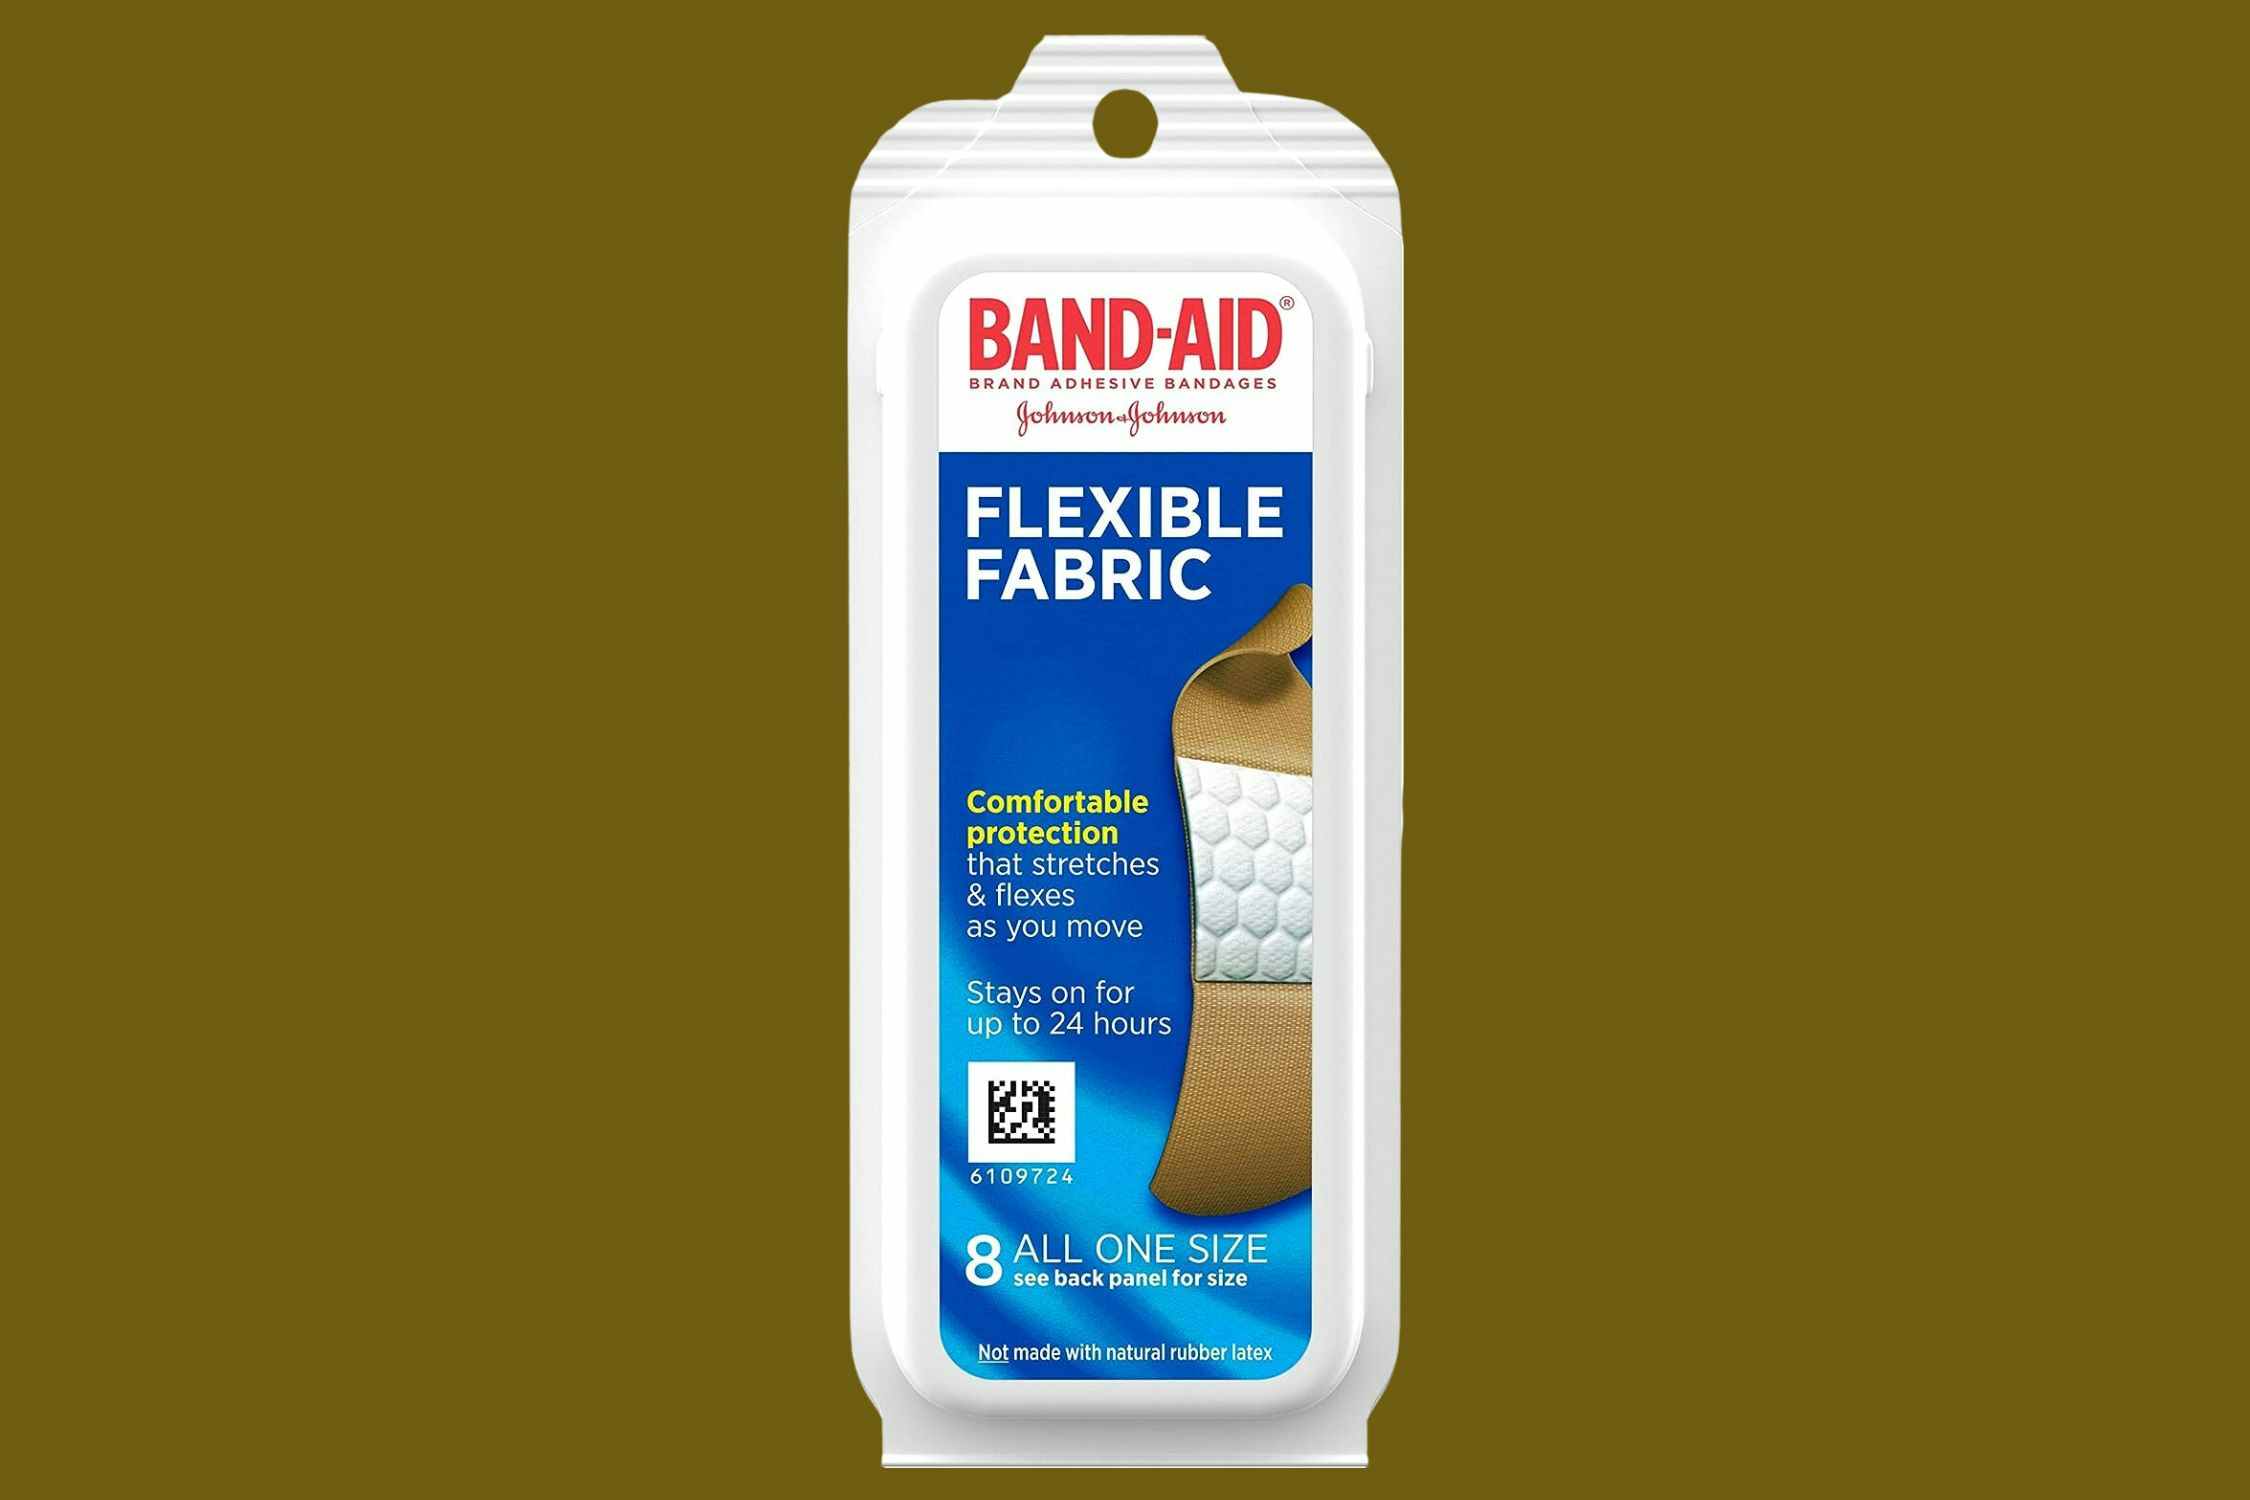 Band-Aid Fabric Bandages 8-Pack, as Low as $0.59 on Amazon